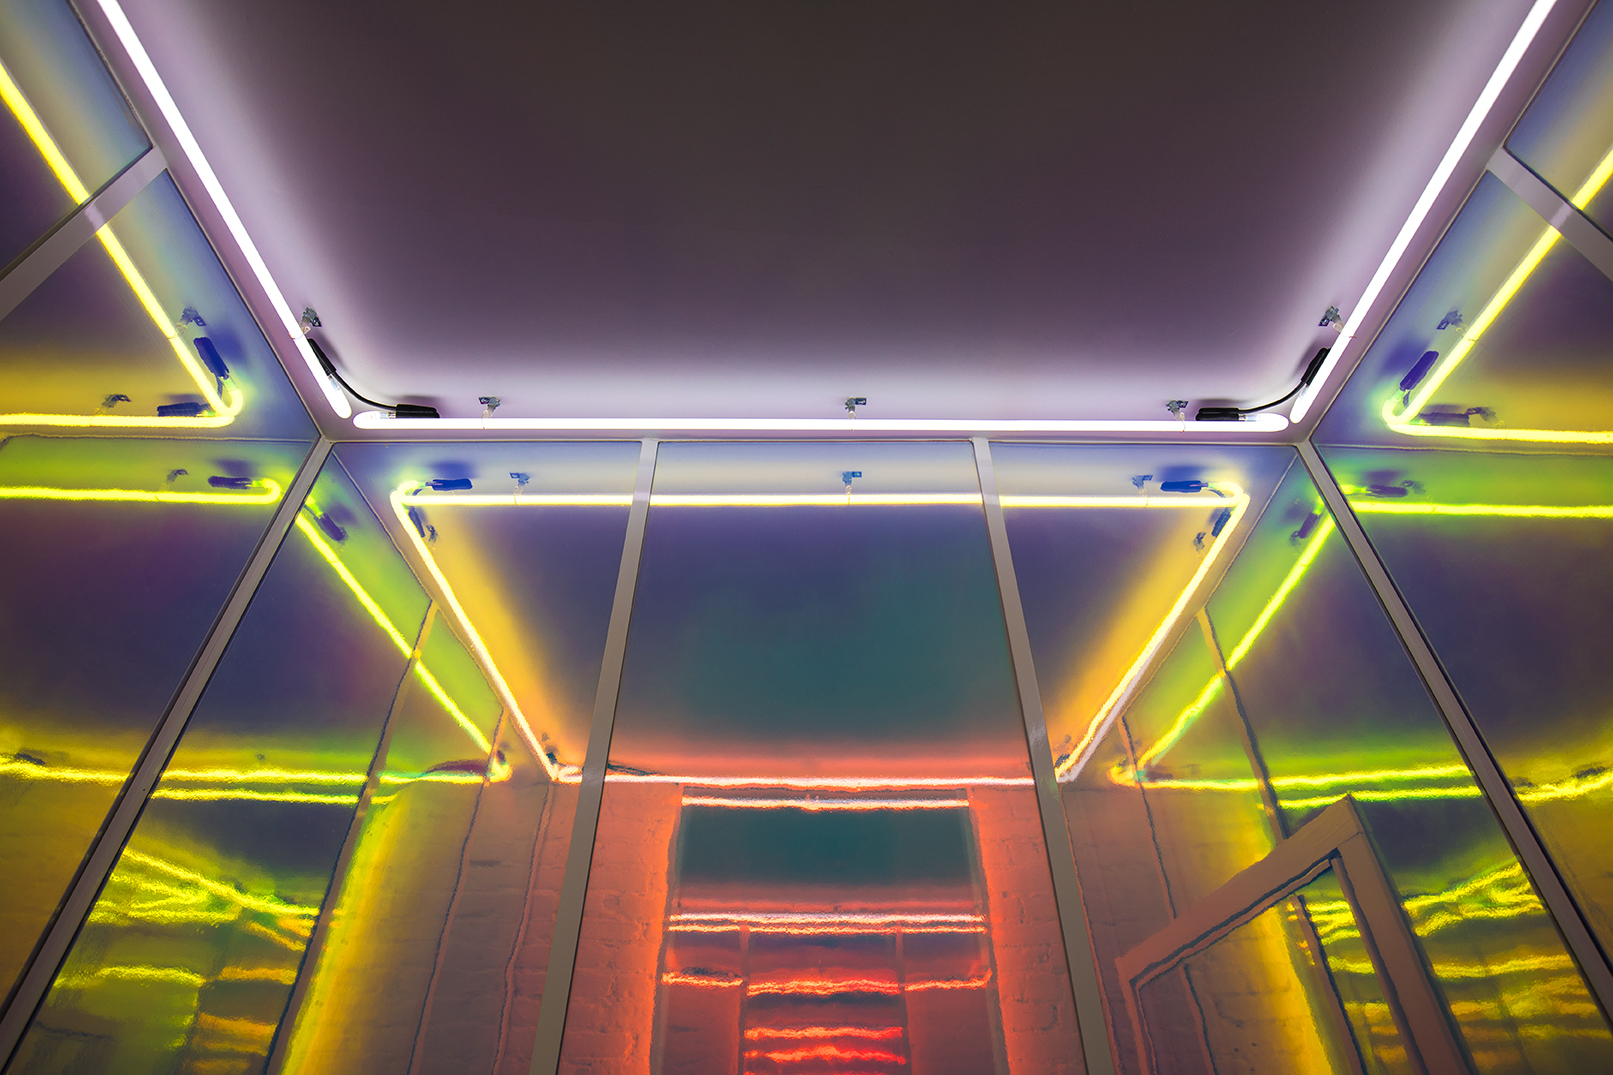 The neon lit ceiling of the fitting room.